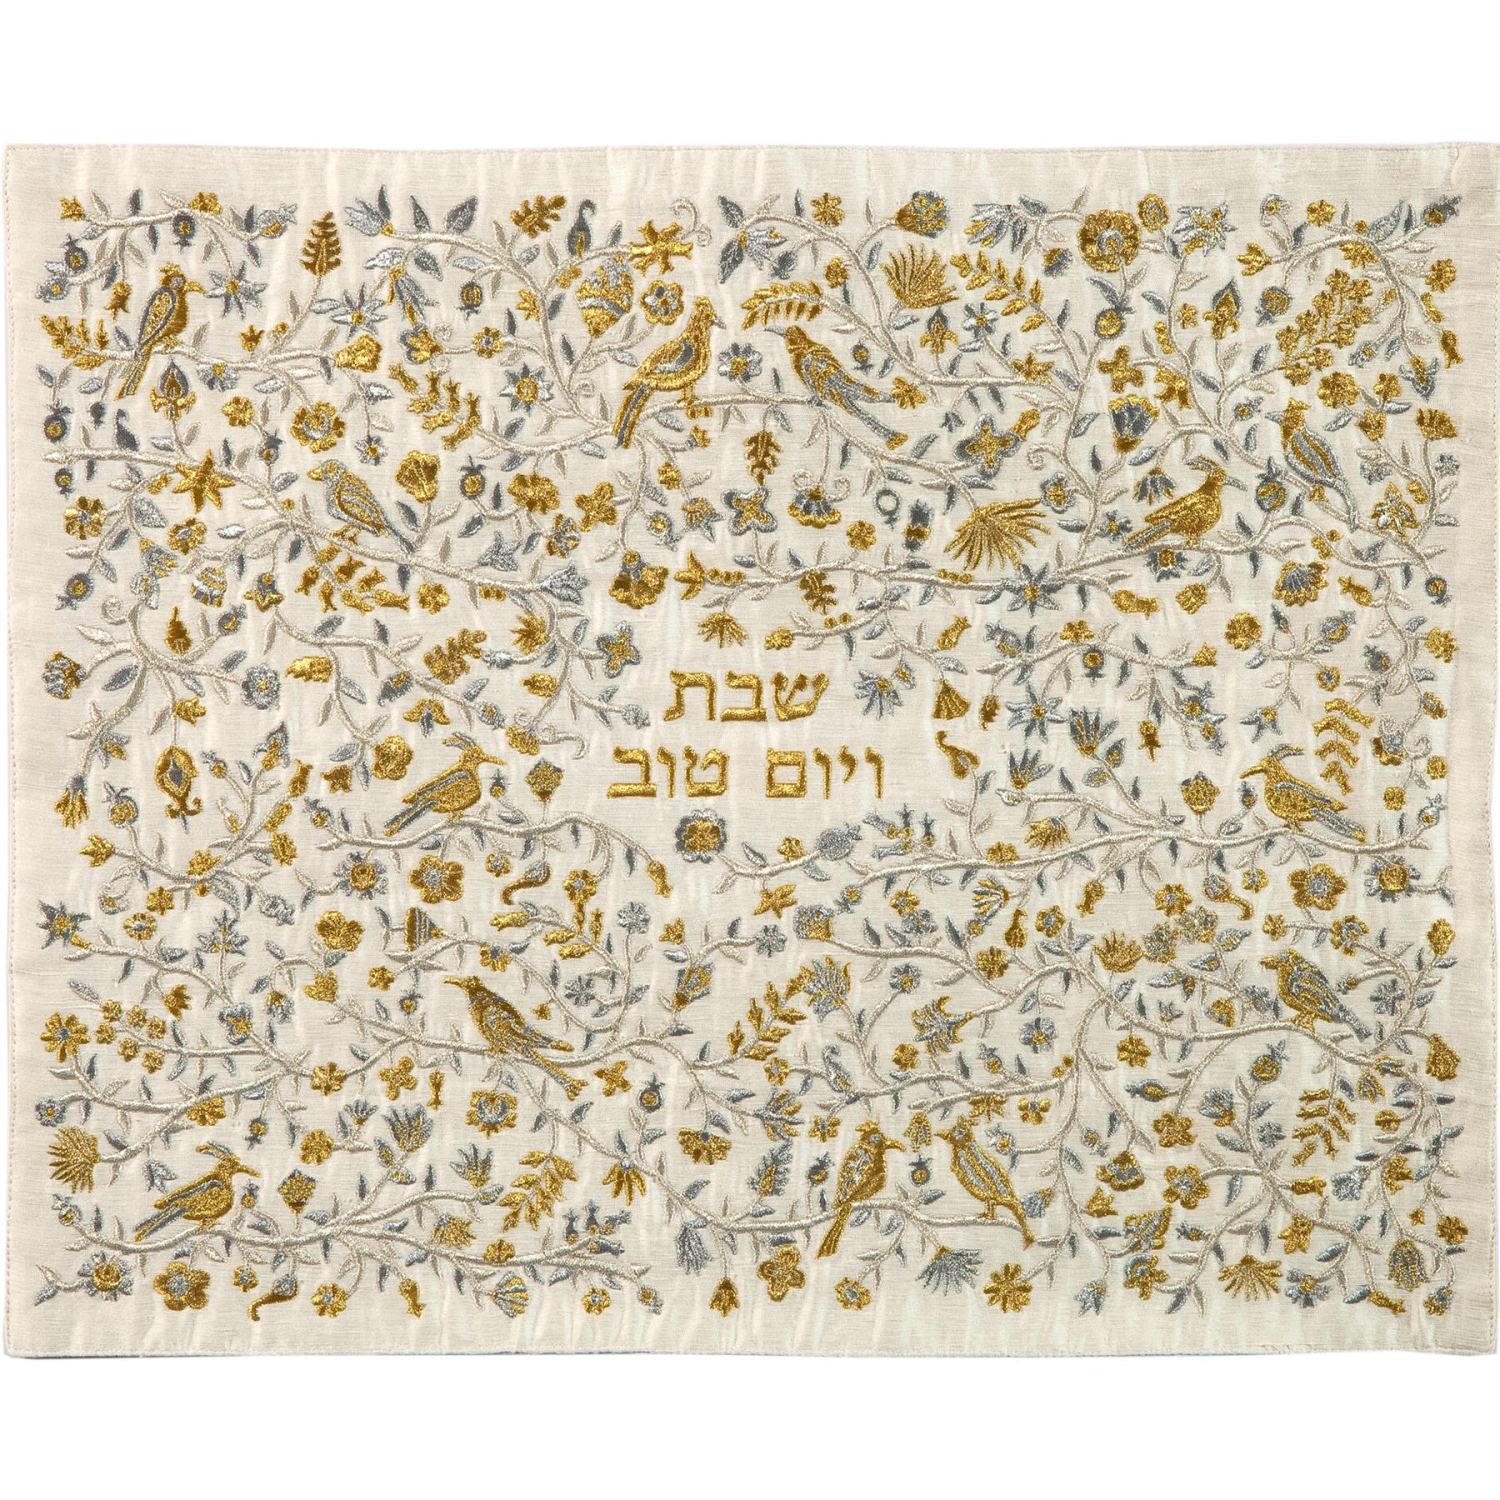 Yair Emanuel Embroidered Challah Cover - Flowers, Birds And Pomegranates (Silver and Gold) - 1